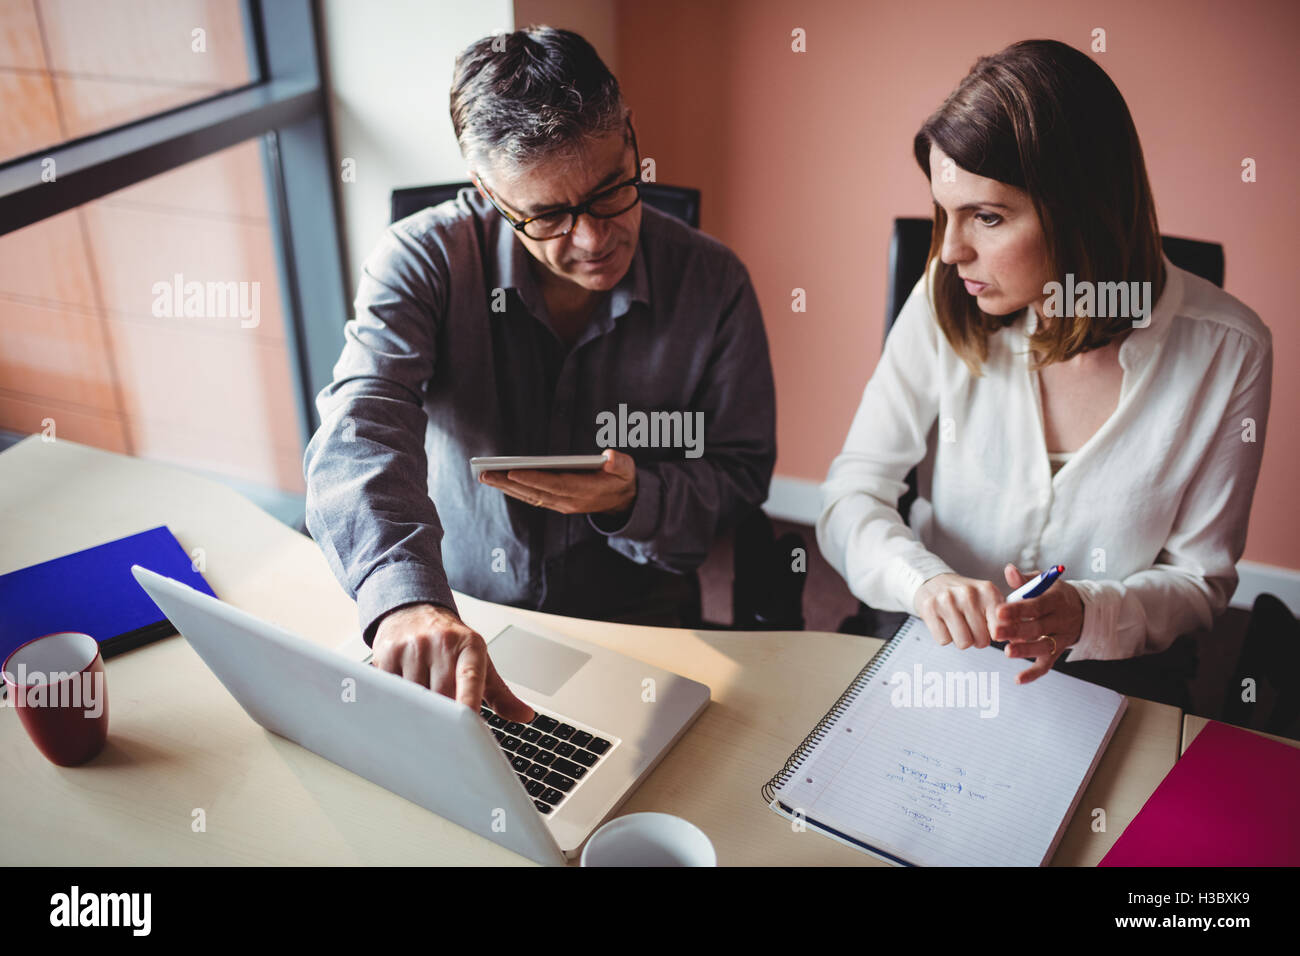 Man and woman discussing over digital tablet and laptop Stock Photo